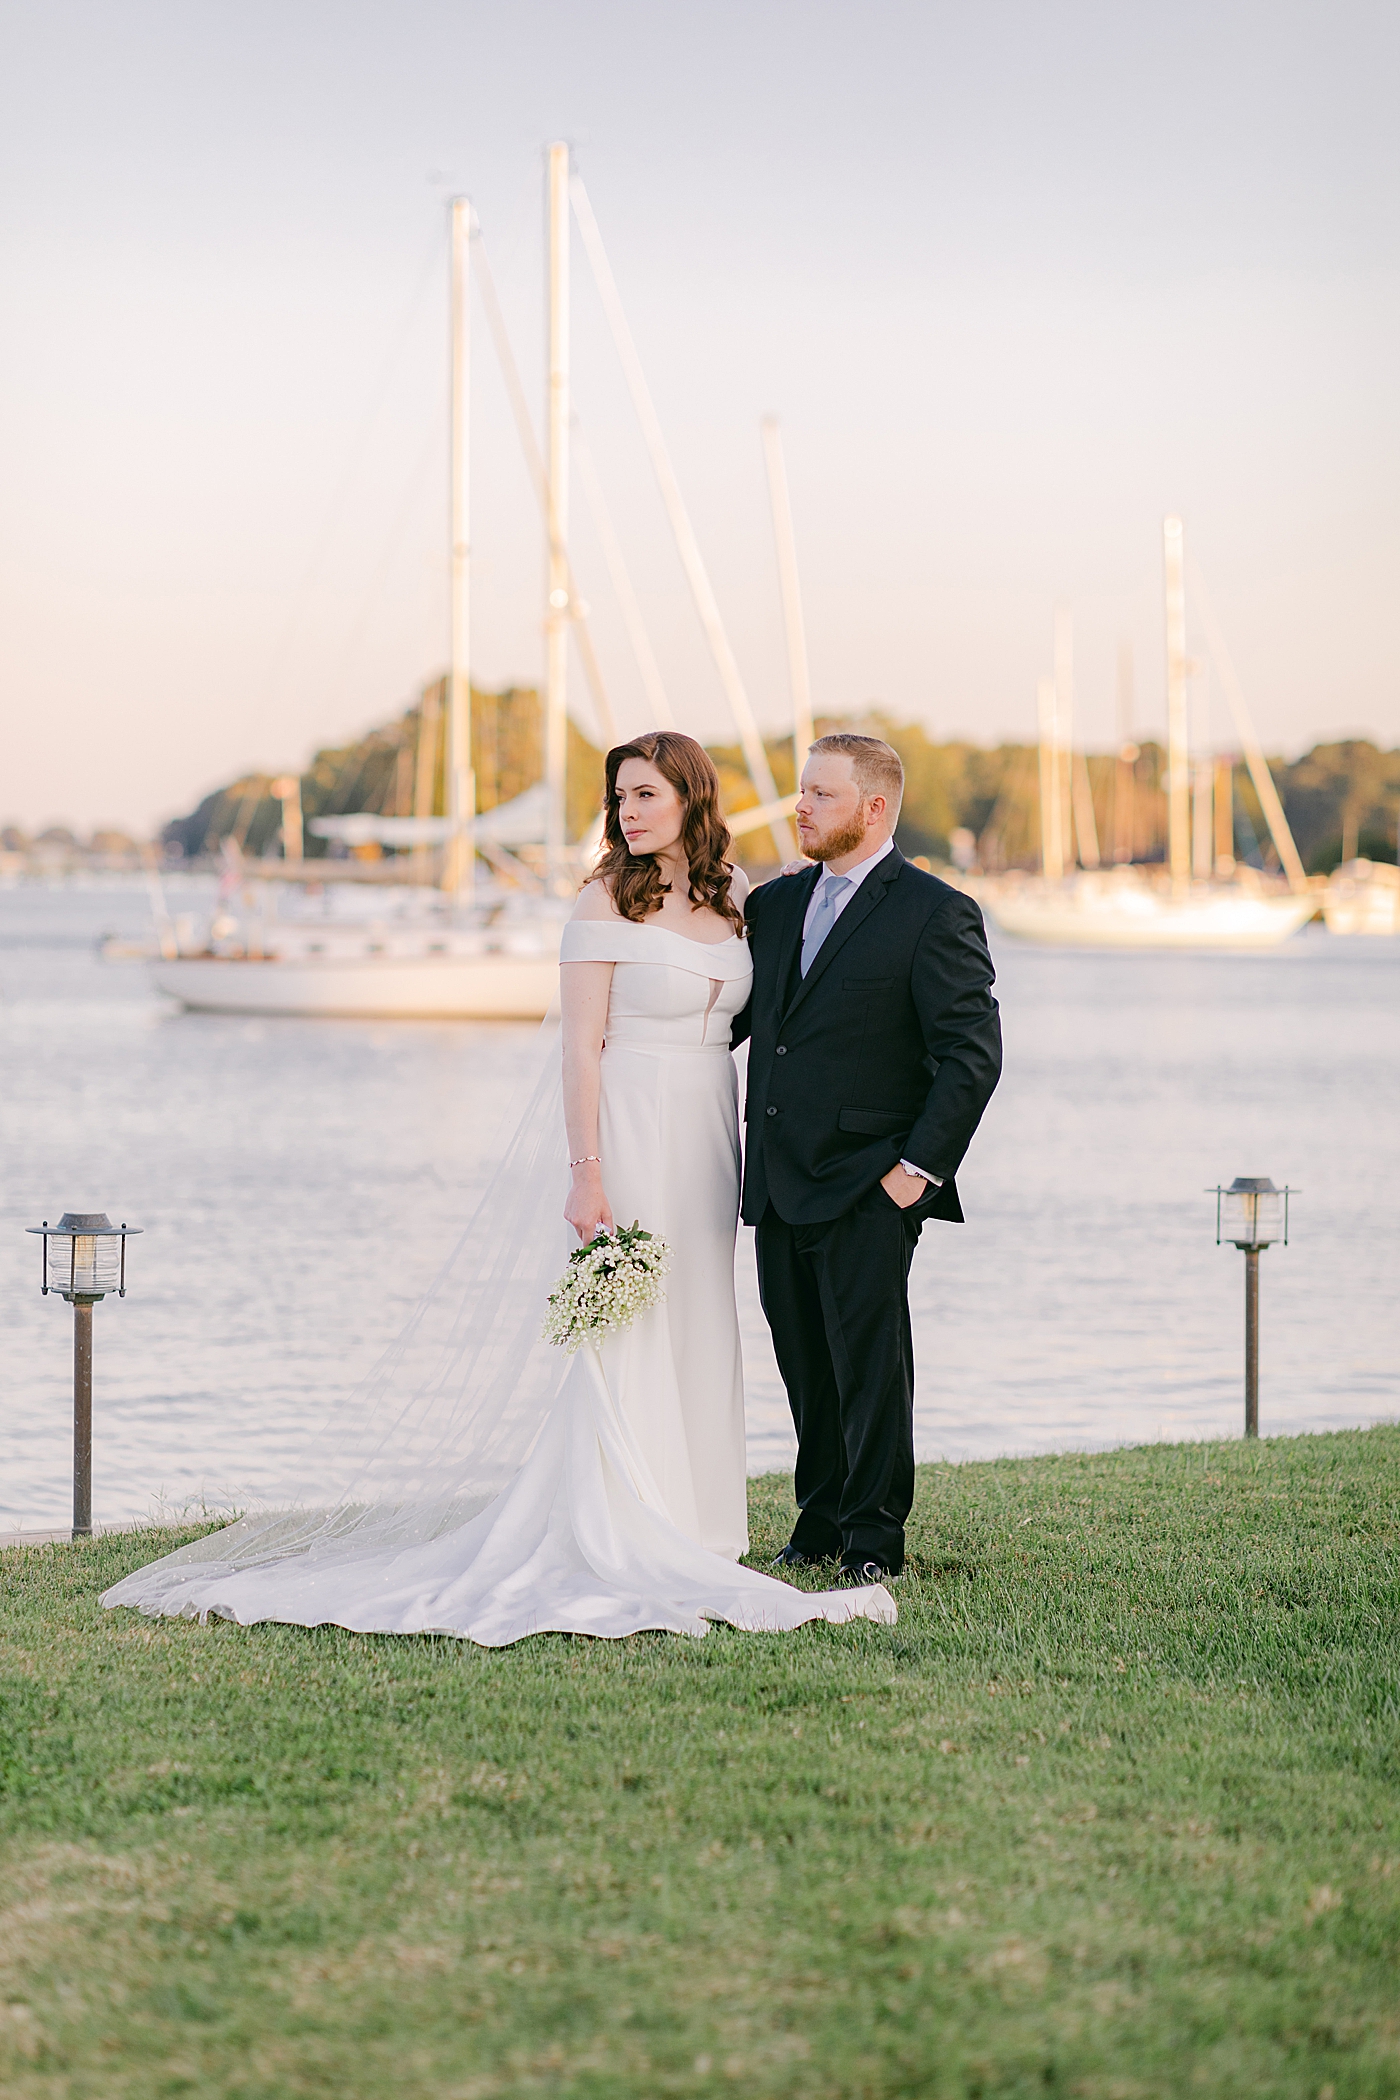 Bride and groom standing together near the harbor | Photo by Hope Helmuth Photography